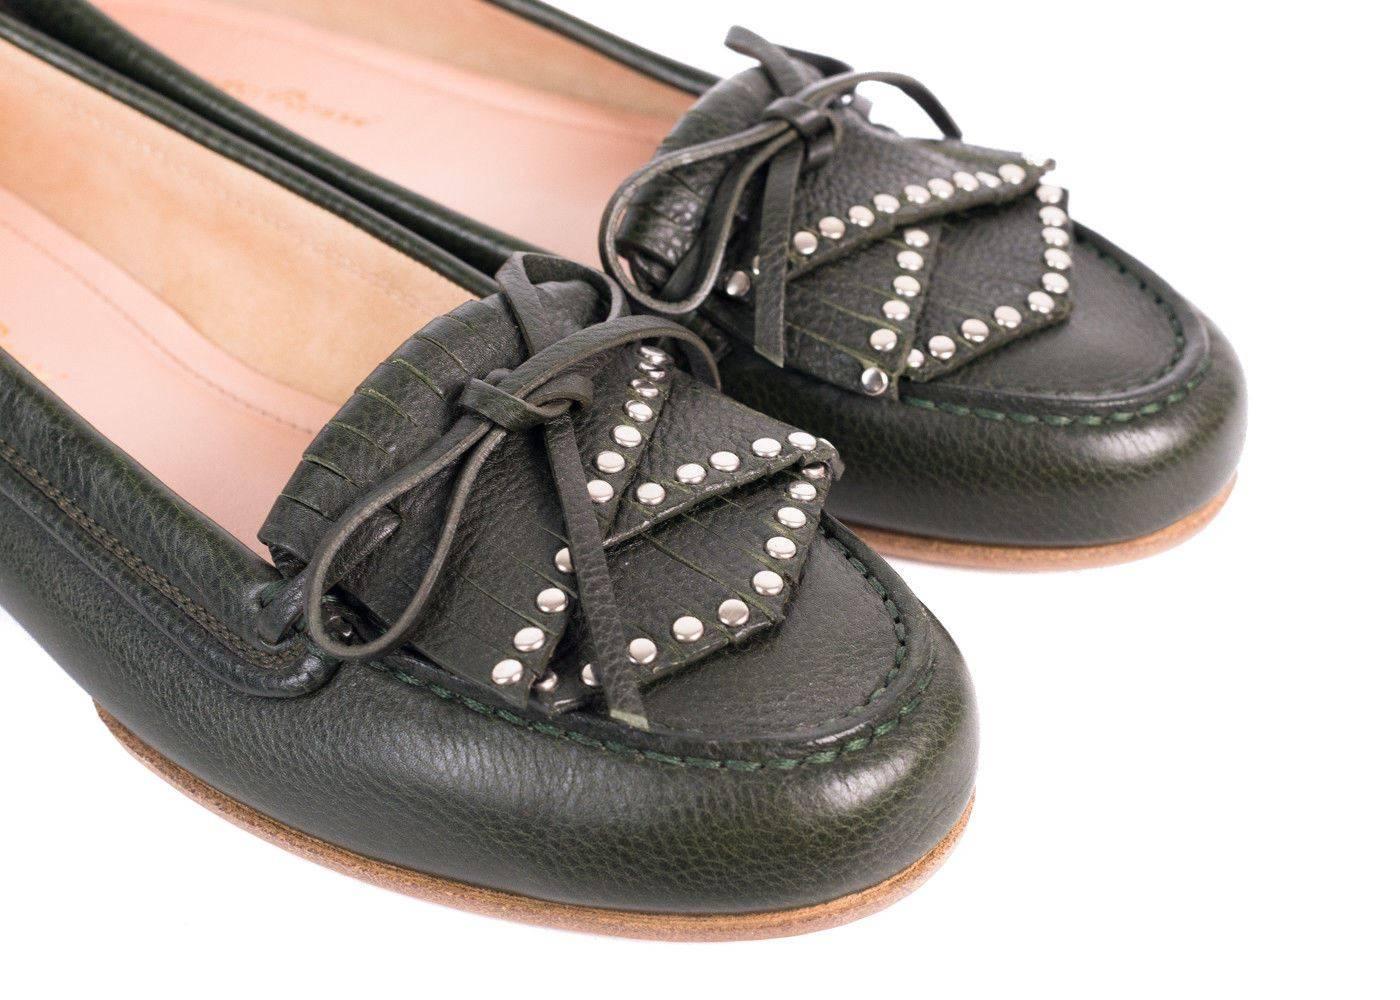 Gianvito Rossi Hunter Green Studded Leather Self-Tie Tassel Moccasins In New Condition For Sale In Brooklyn, NY